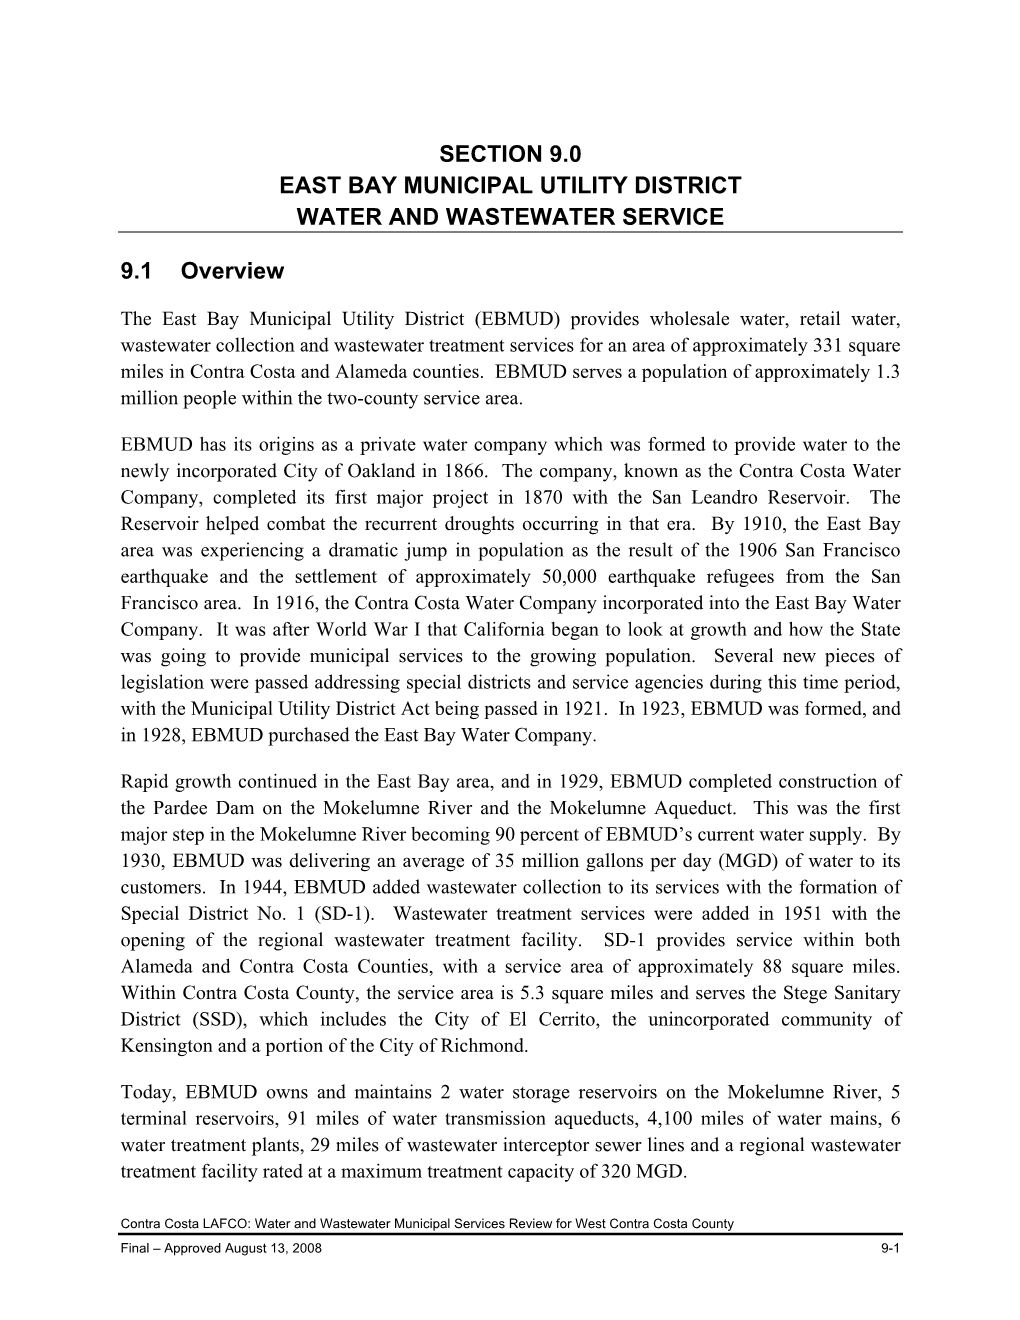 Section 9.0 East Bay Municipal Utility District Water and Wastewater Service